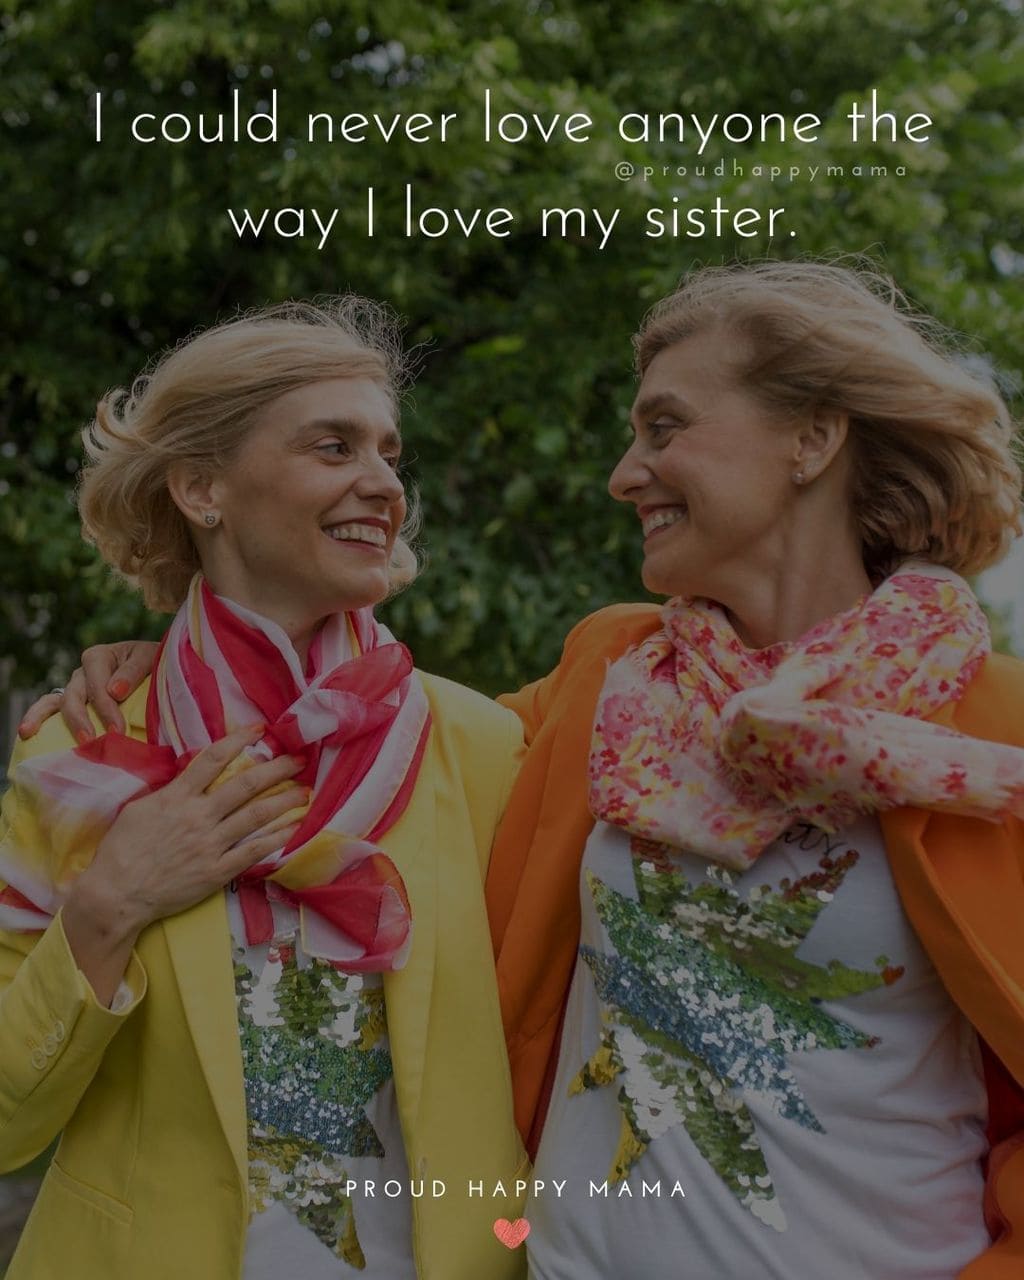 Sister Quotes - I could never love anyone the way I love my sister.